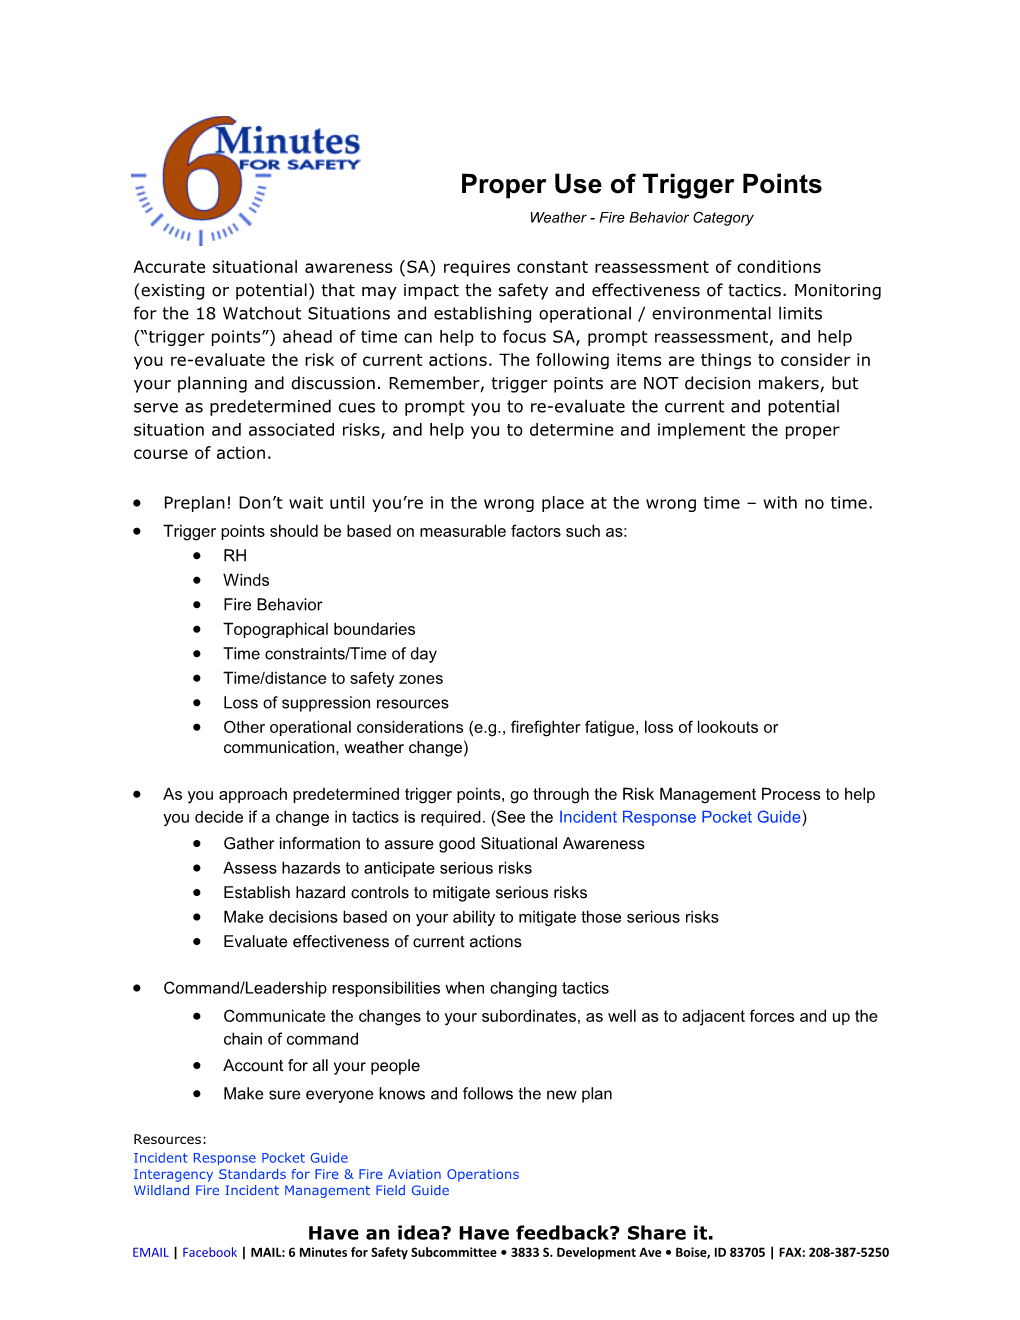 Trigger Points Should Be Based on Measurable Factors Such As